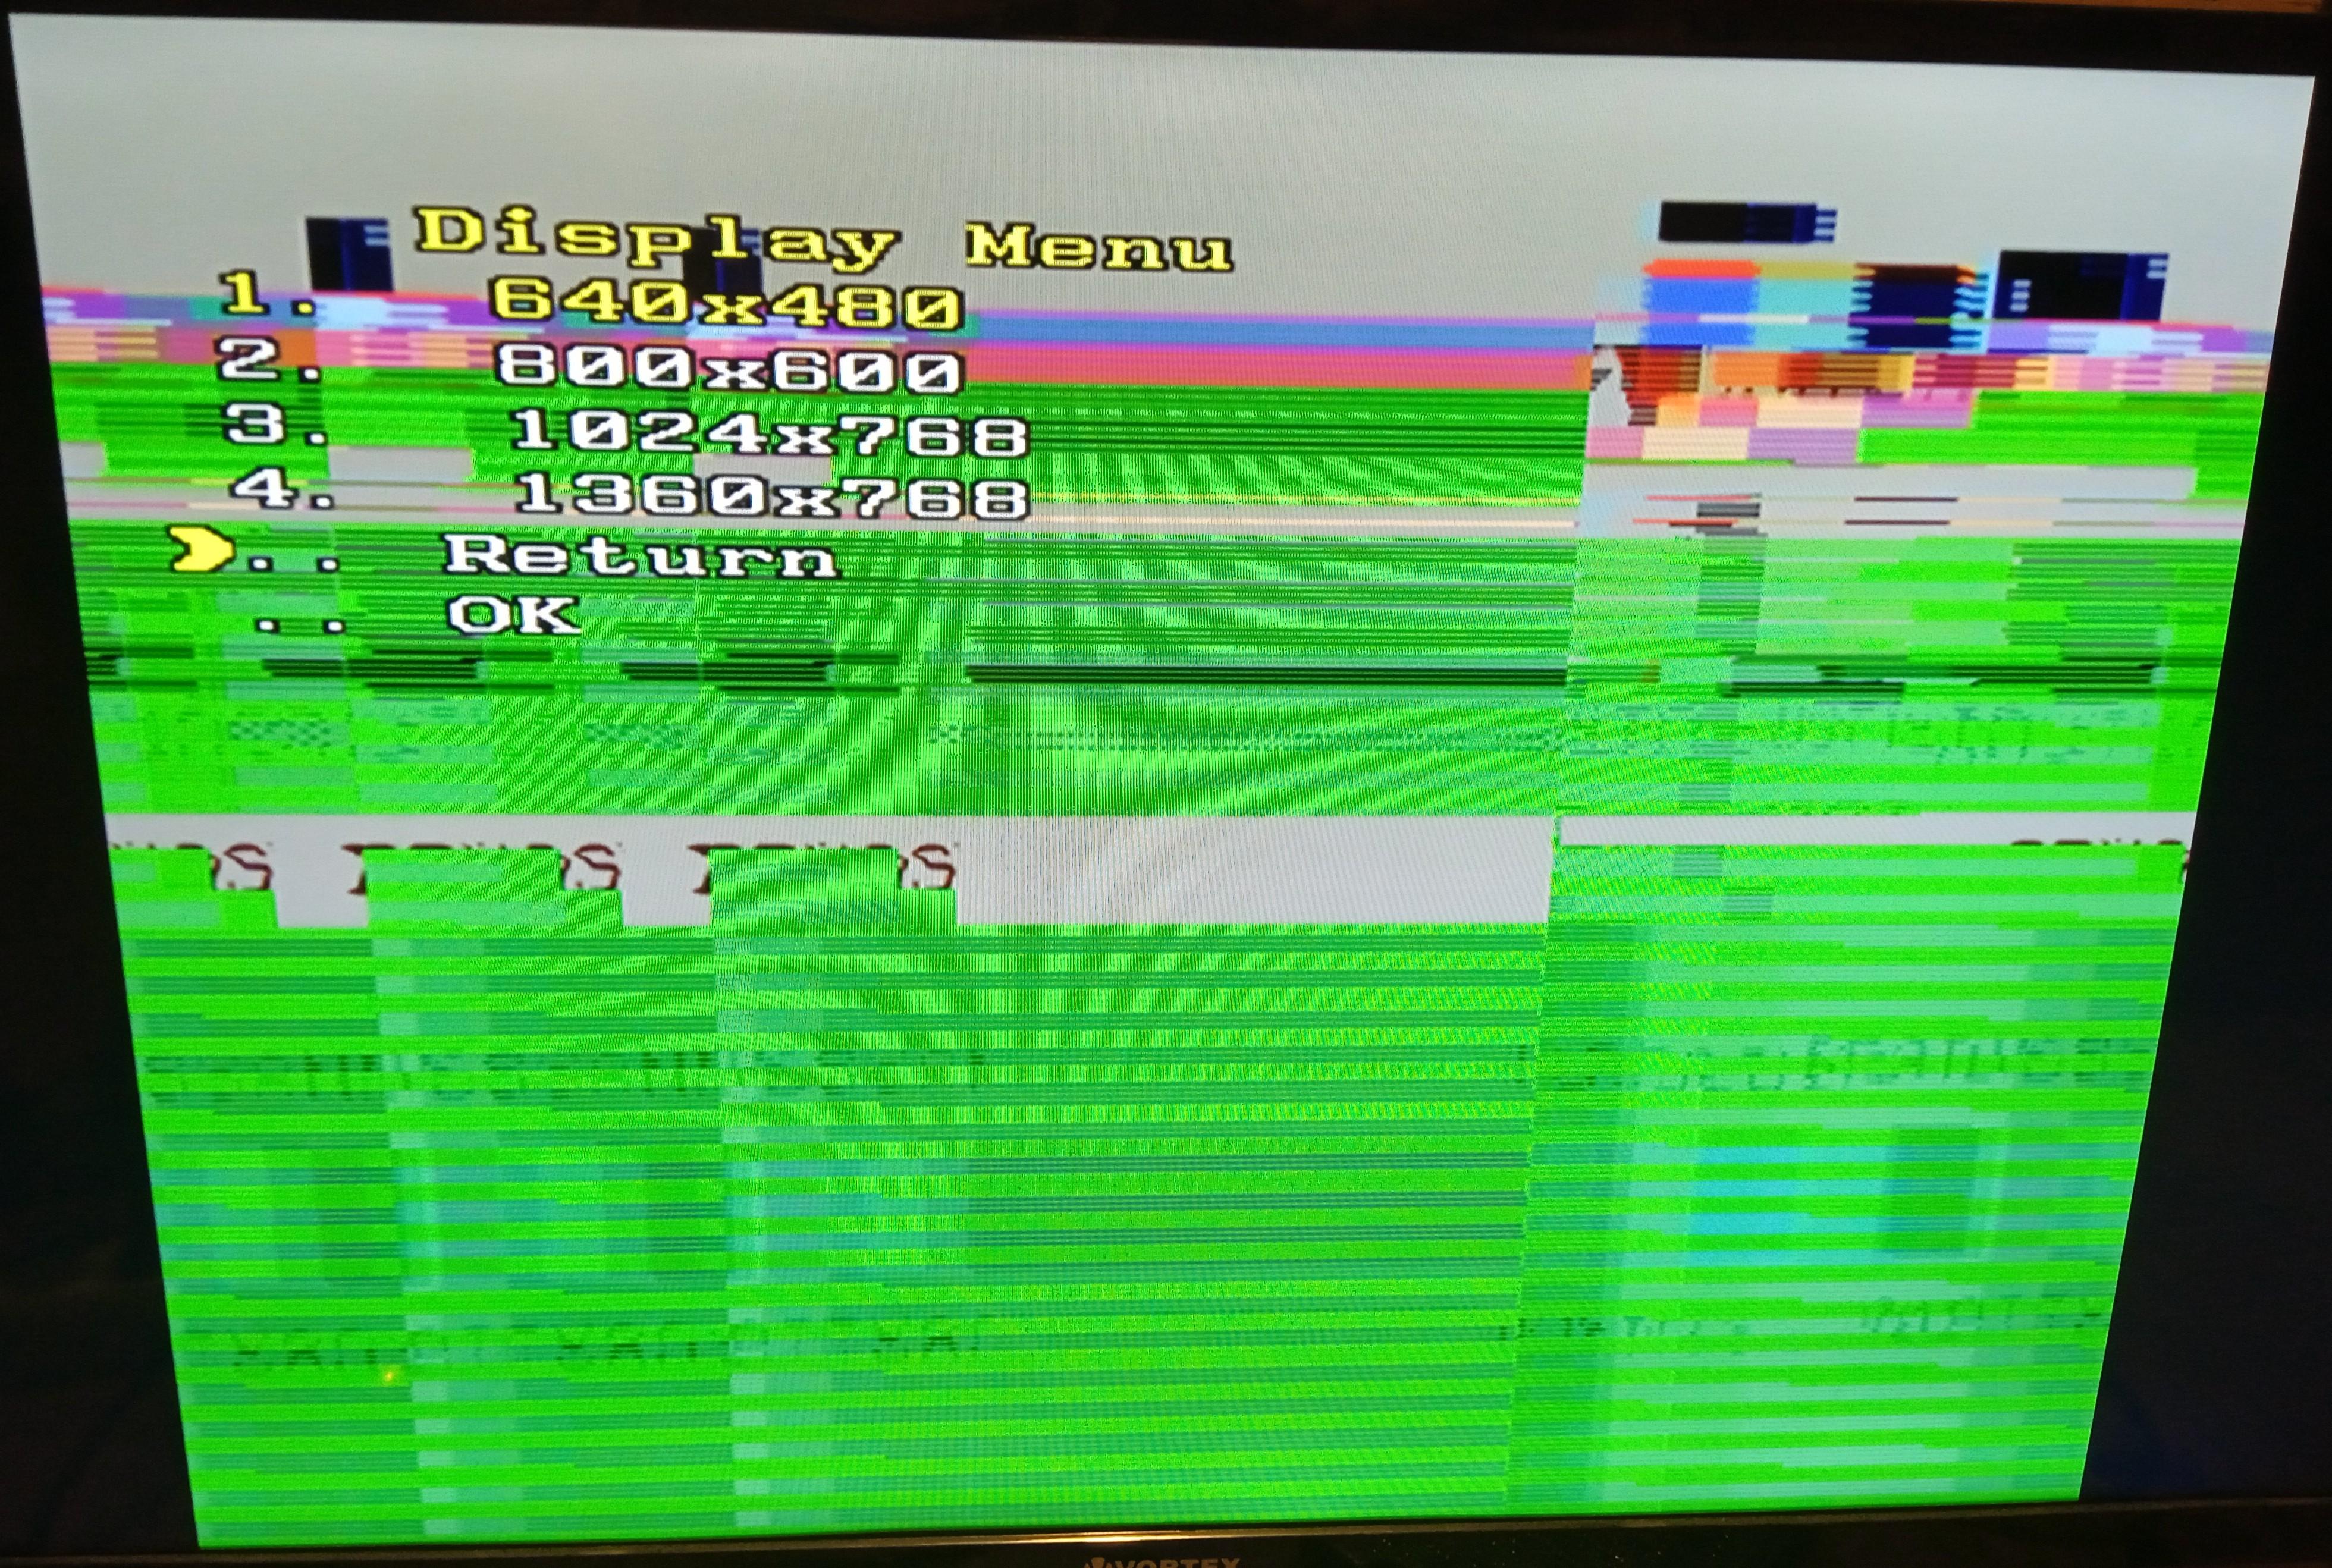 Gonbes video output shows a mess.